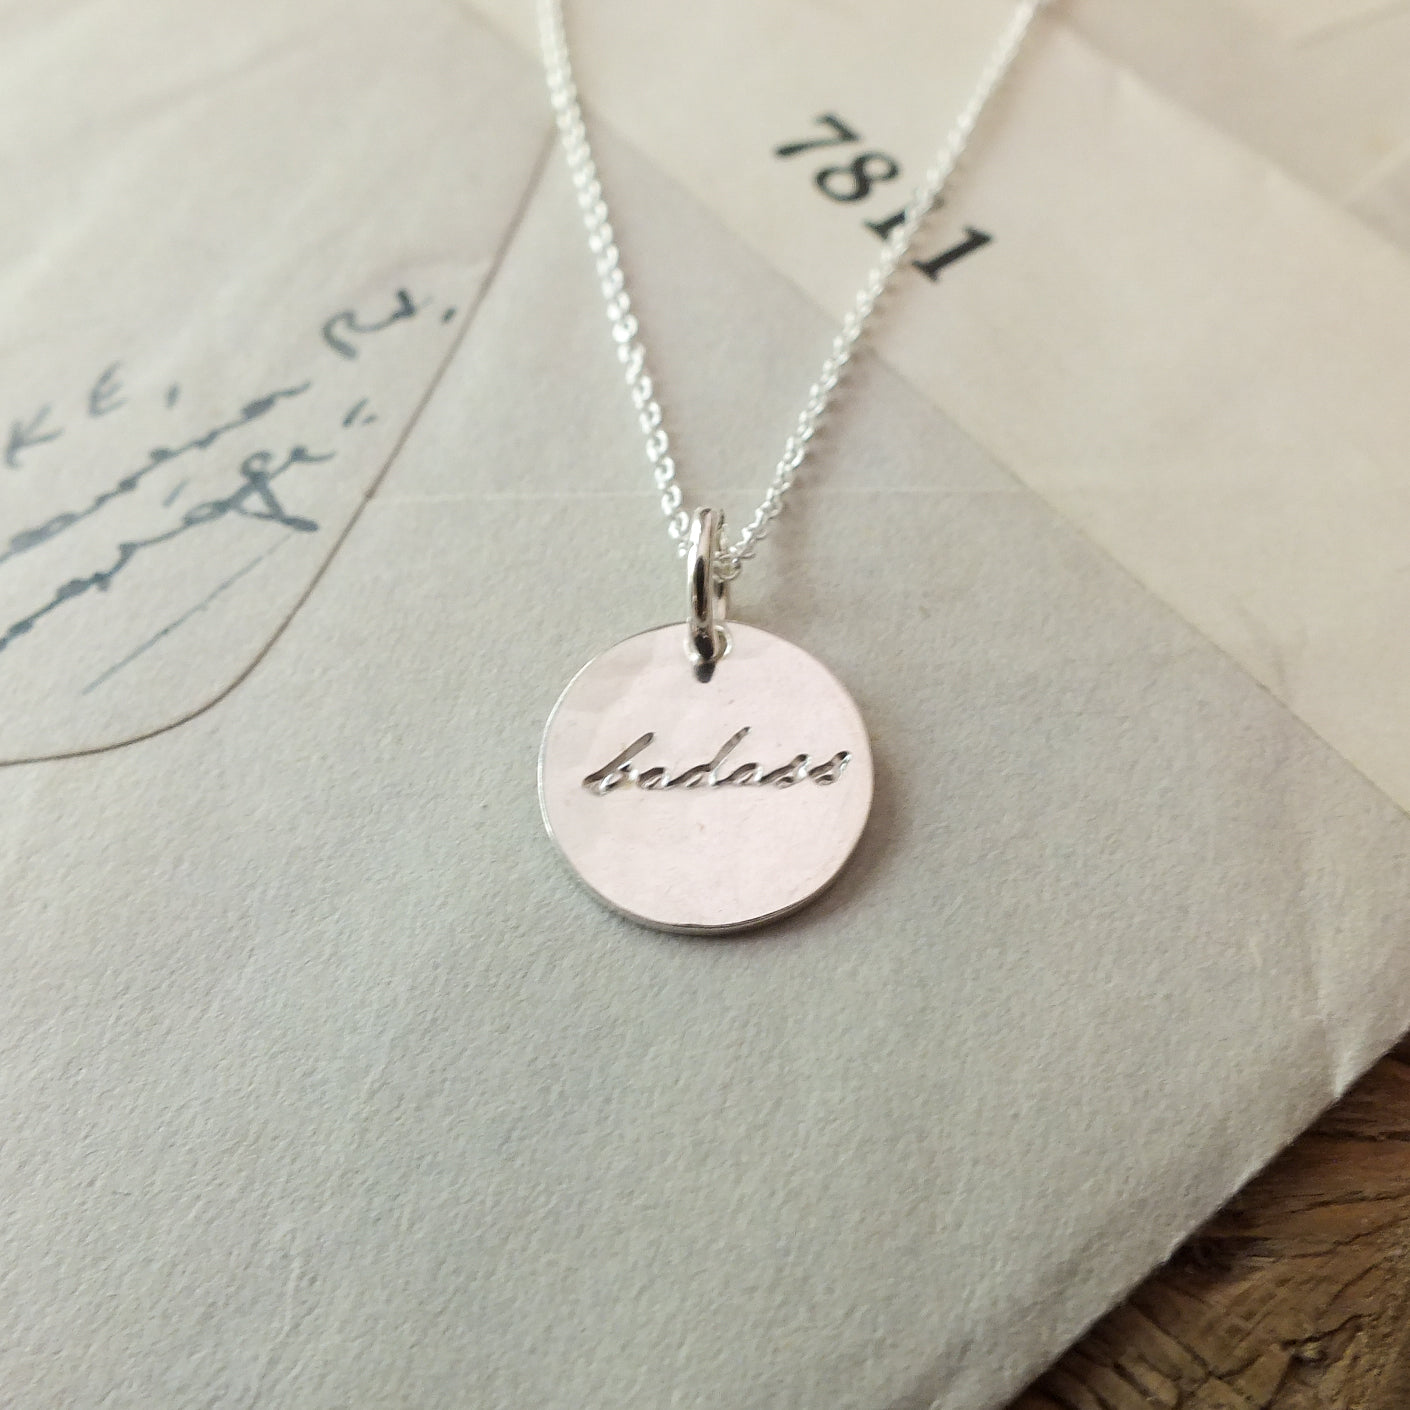 A Becoming Jewelry Badass Necklace with the word &quot;badass&quot; engraved, resting on an envelope.